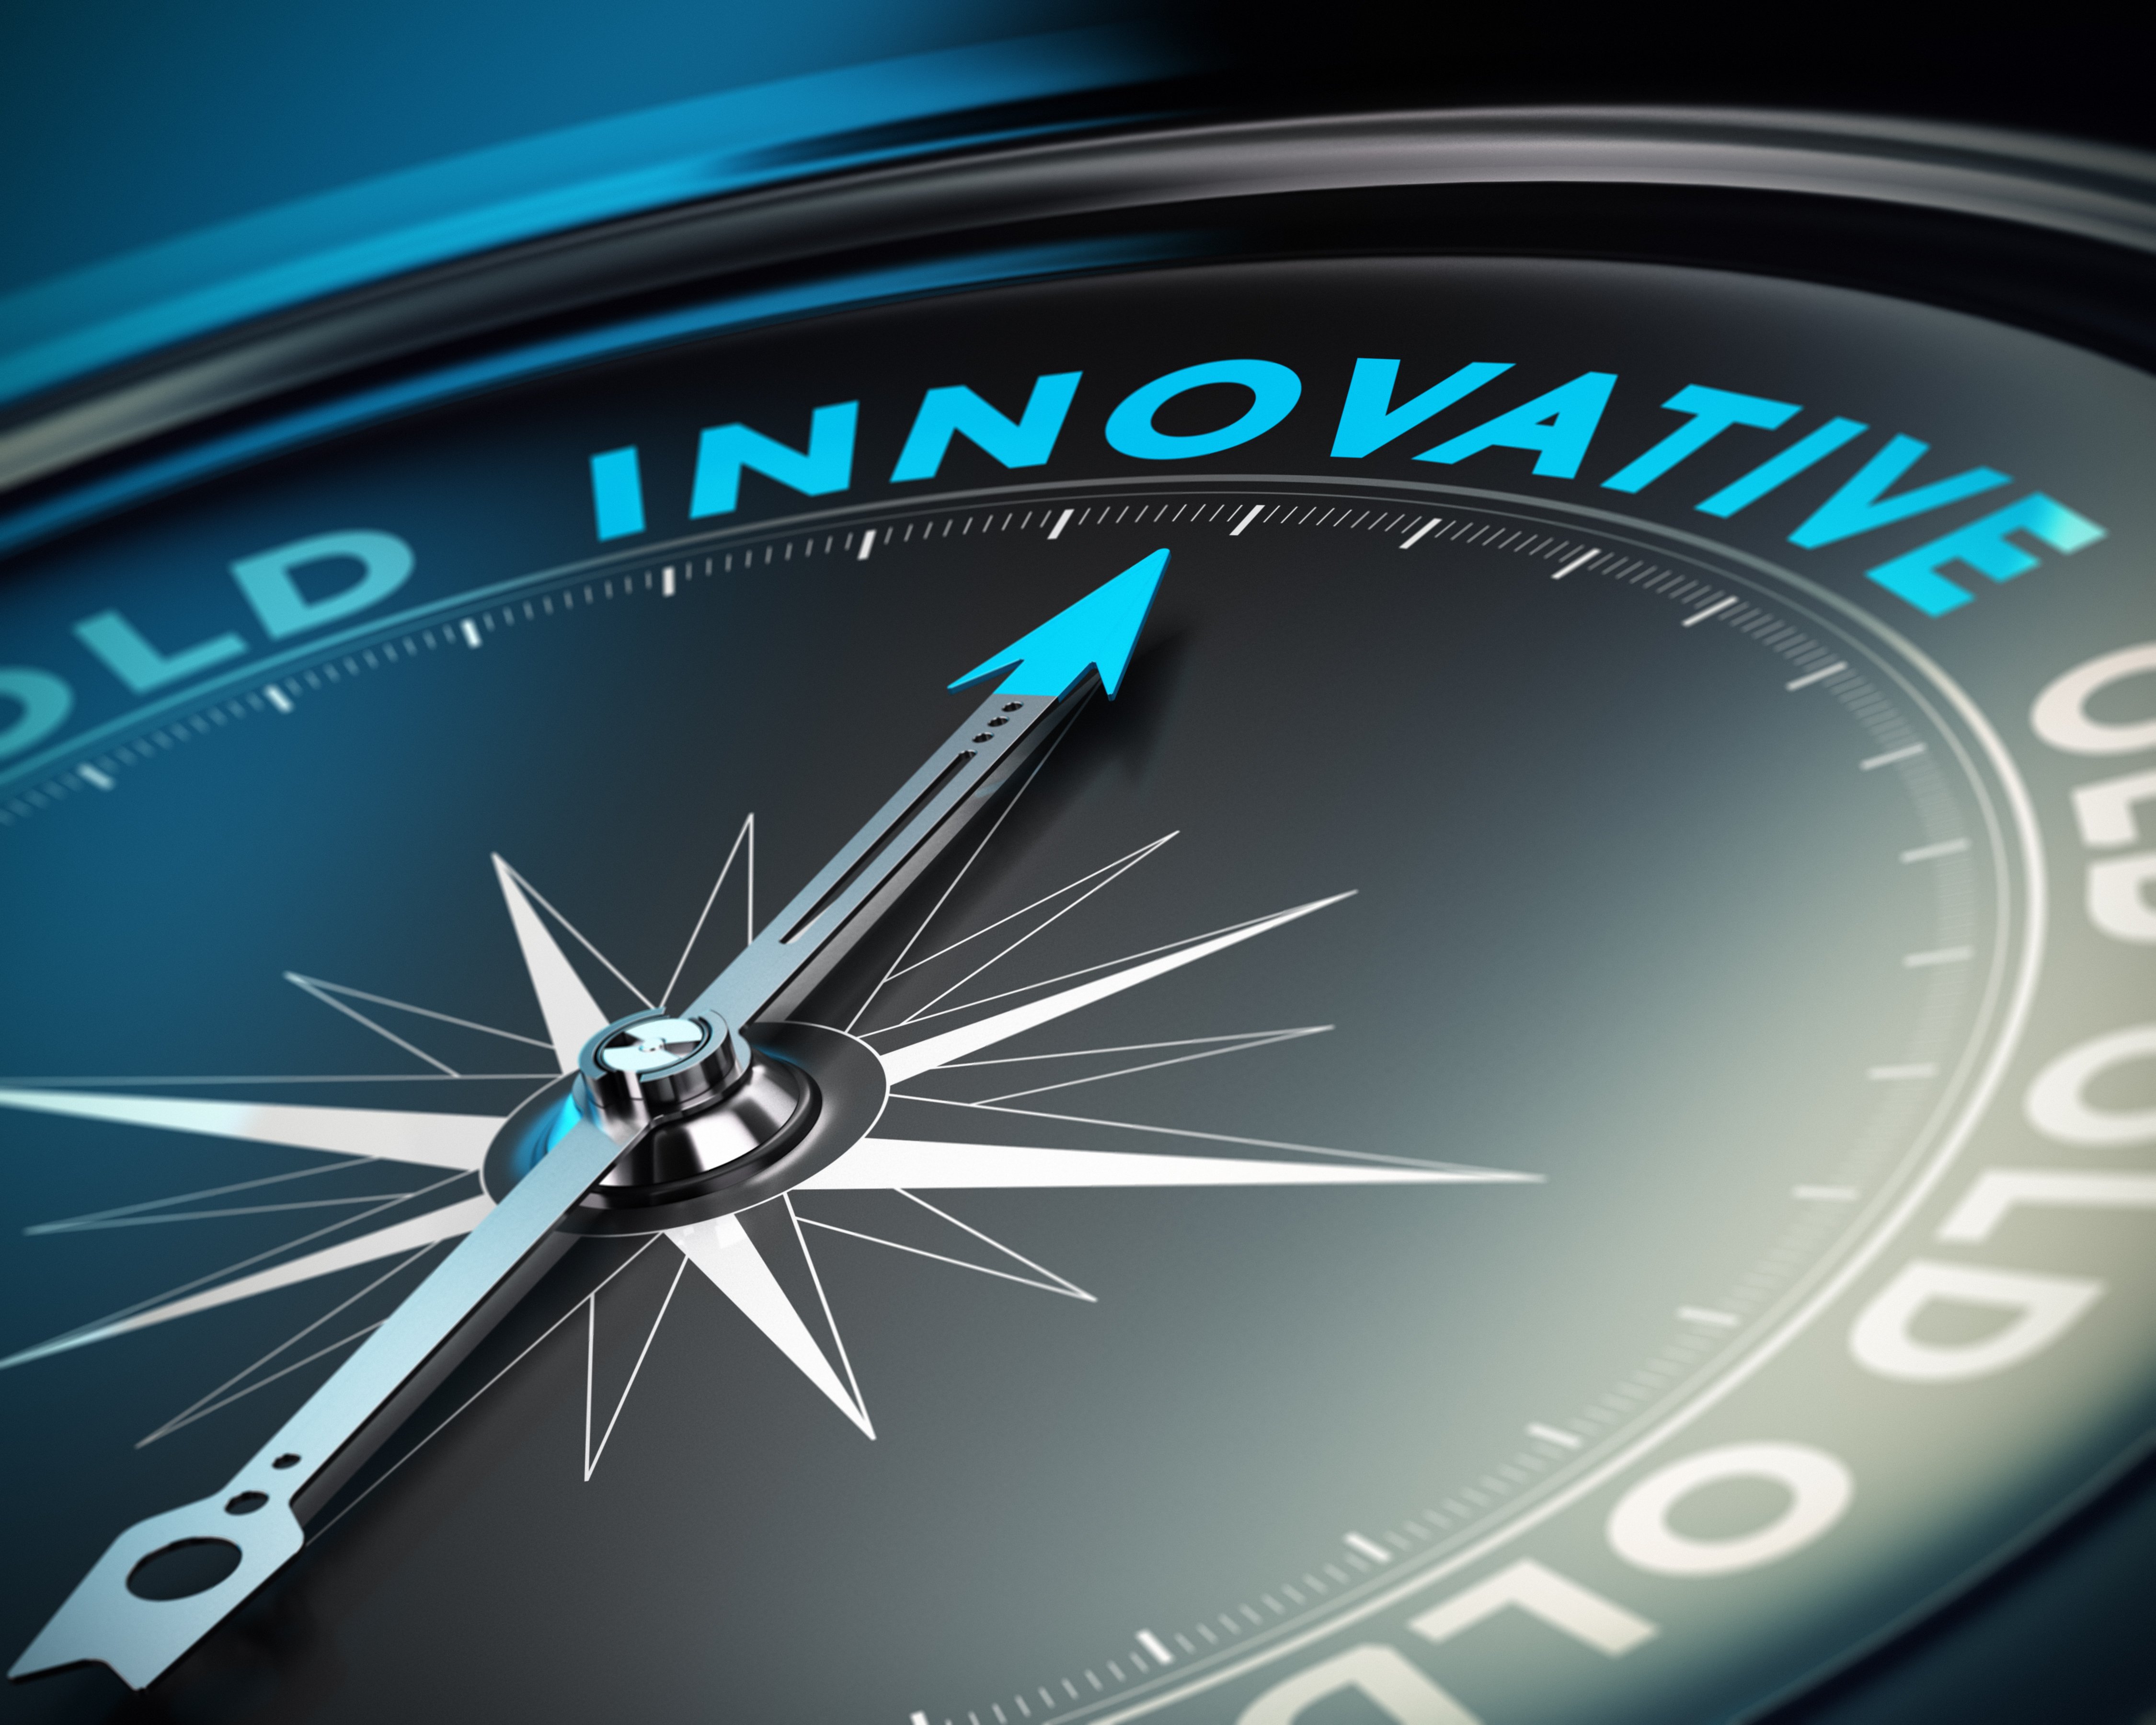 A compass pointing to the word Innovative